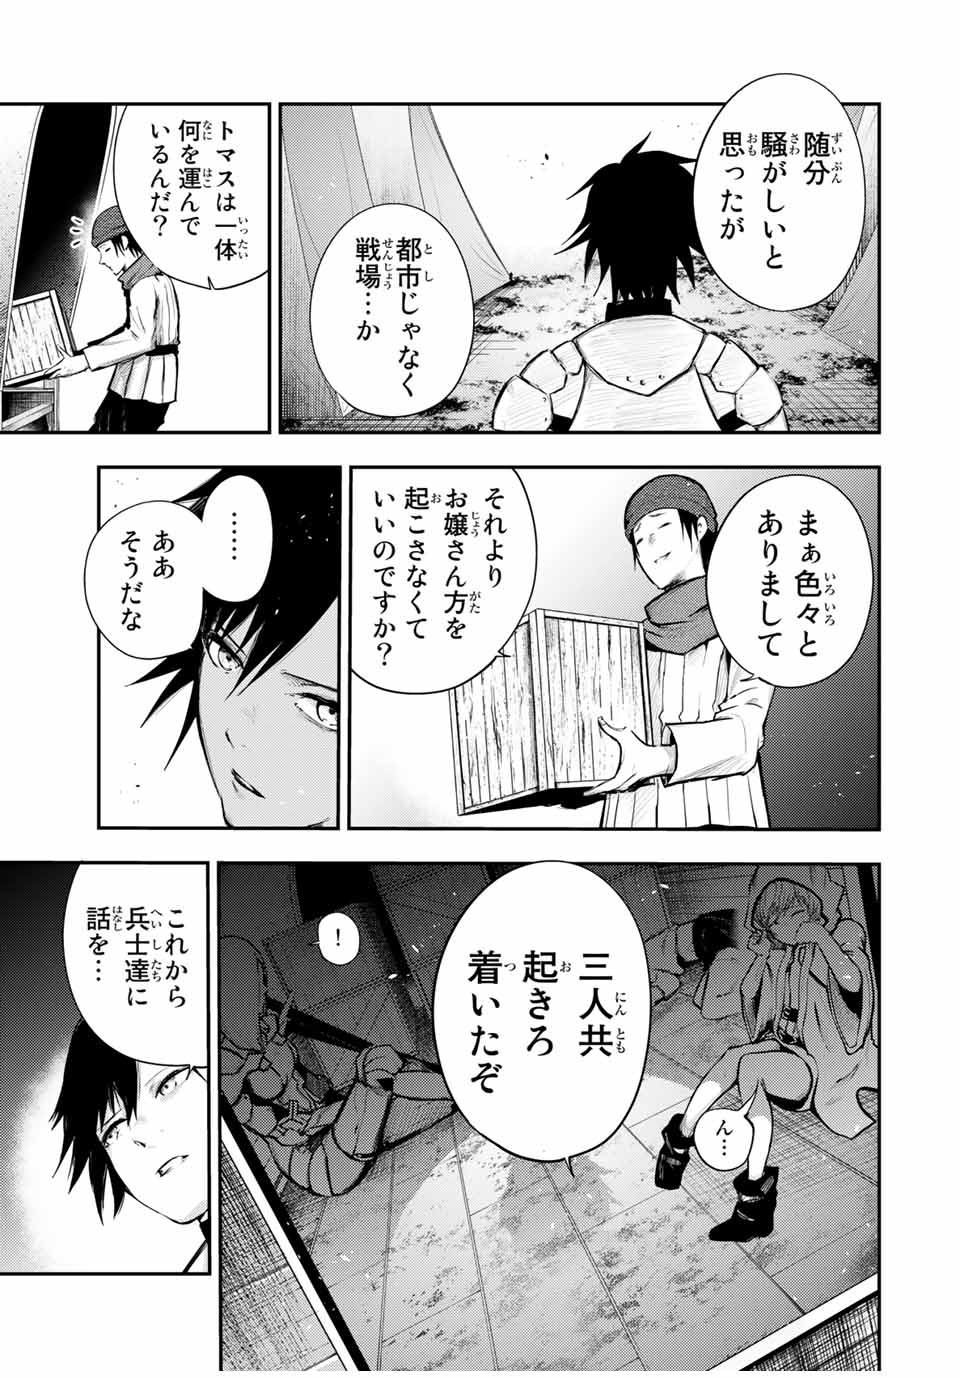 the strongest former prince-; 奴隷転生 ～その奴隷、最強の元王子につき～ 第27話 - Page 7